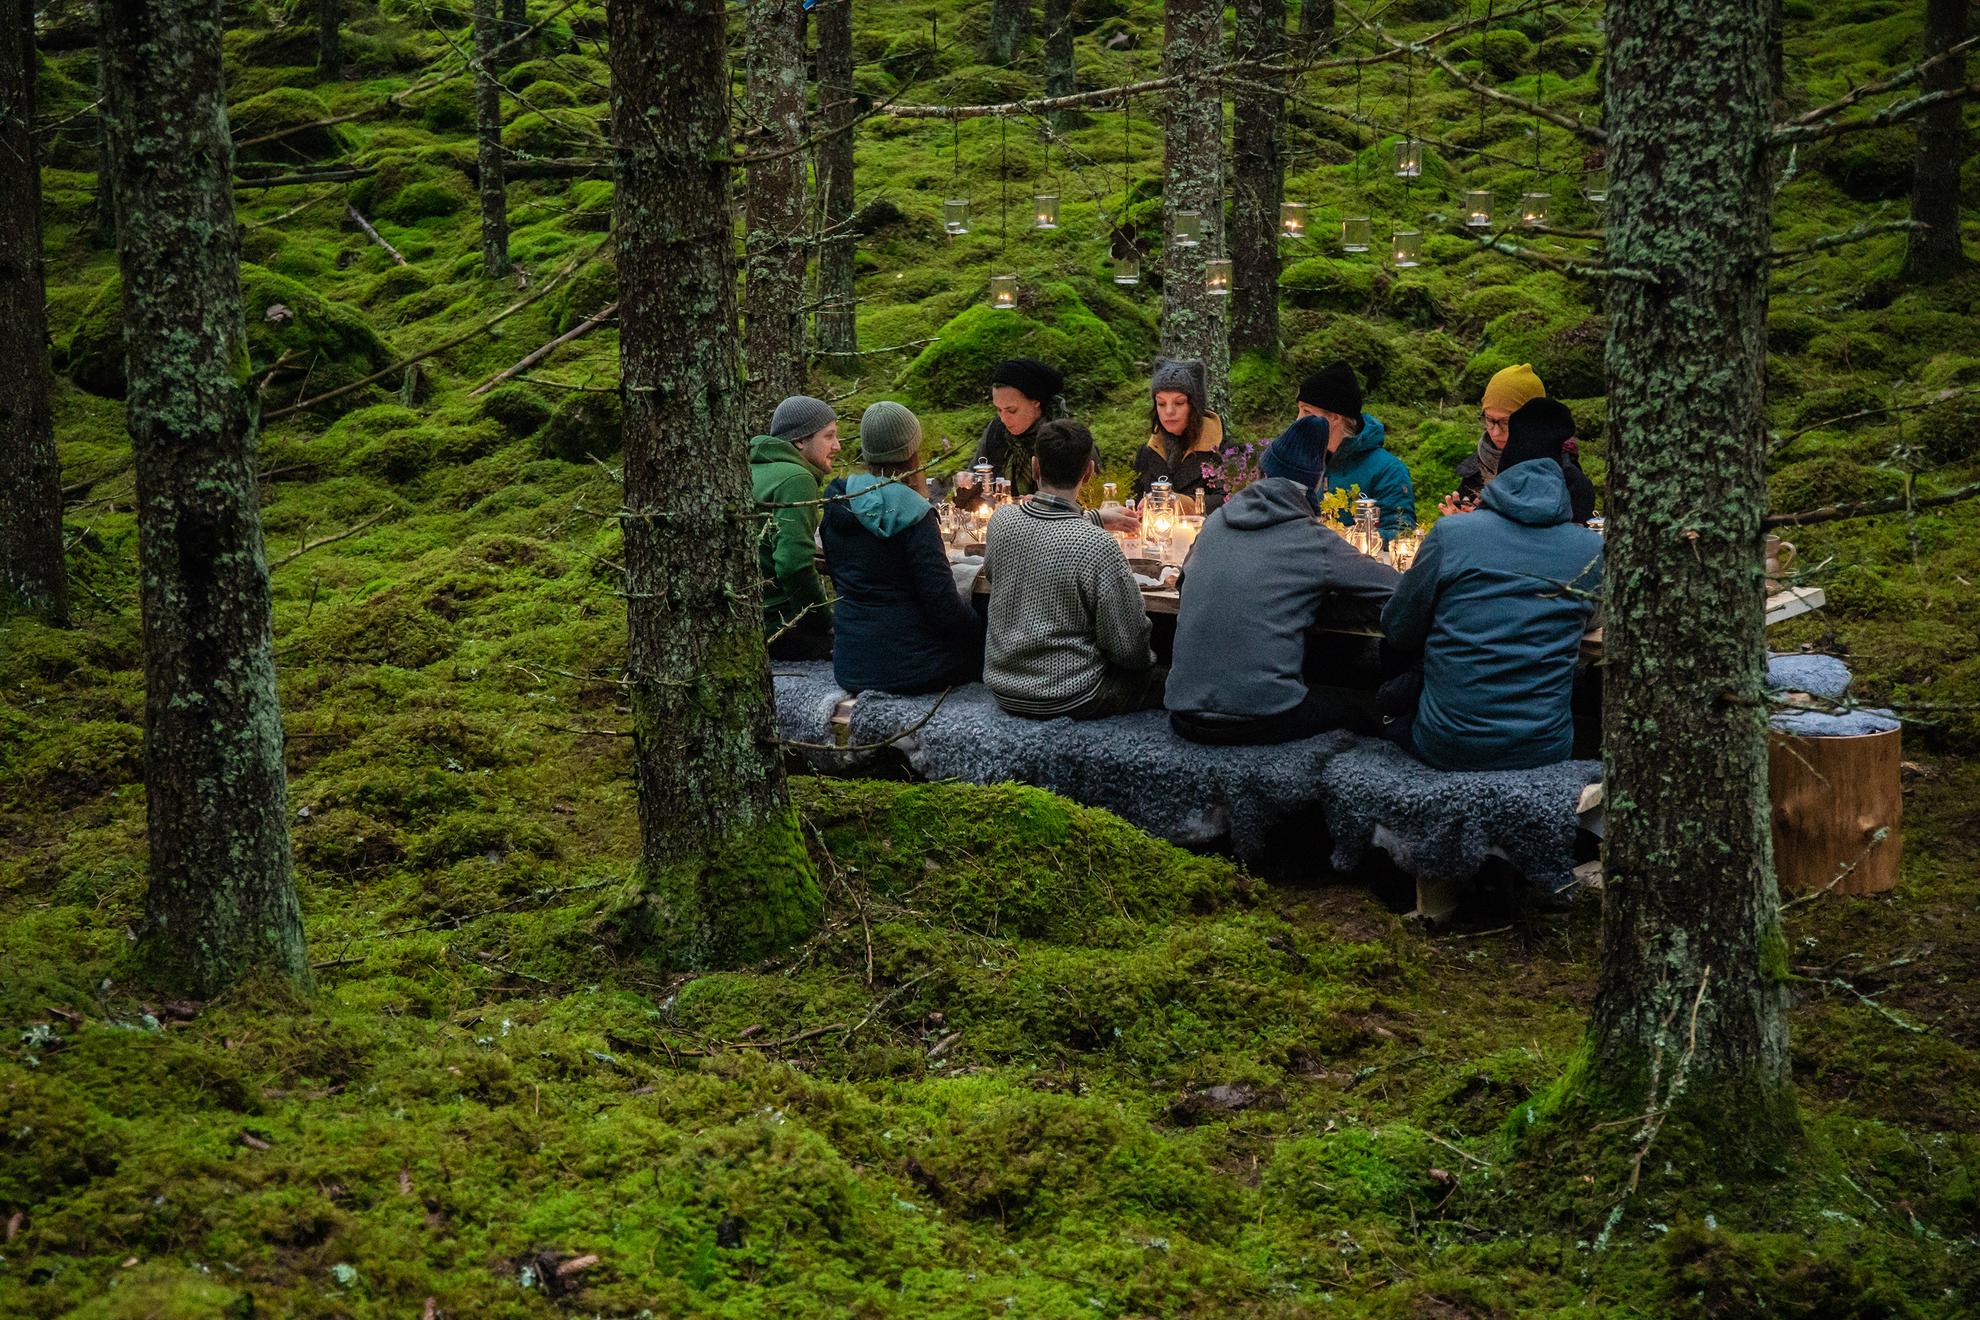 A group of people sitting at a wooden table in the forest.